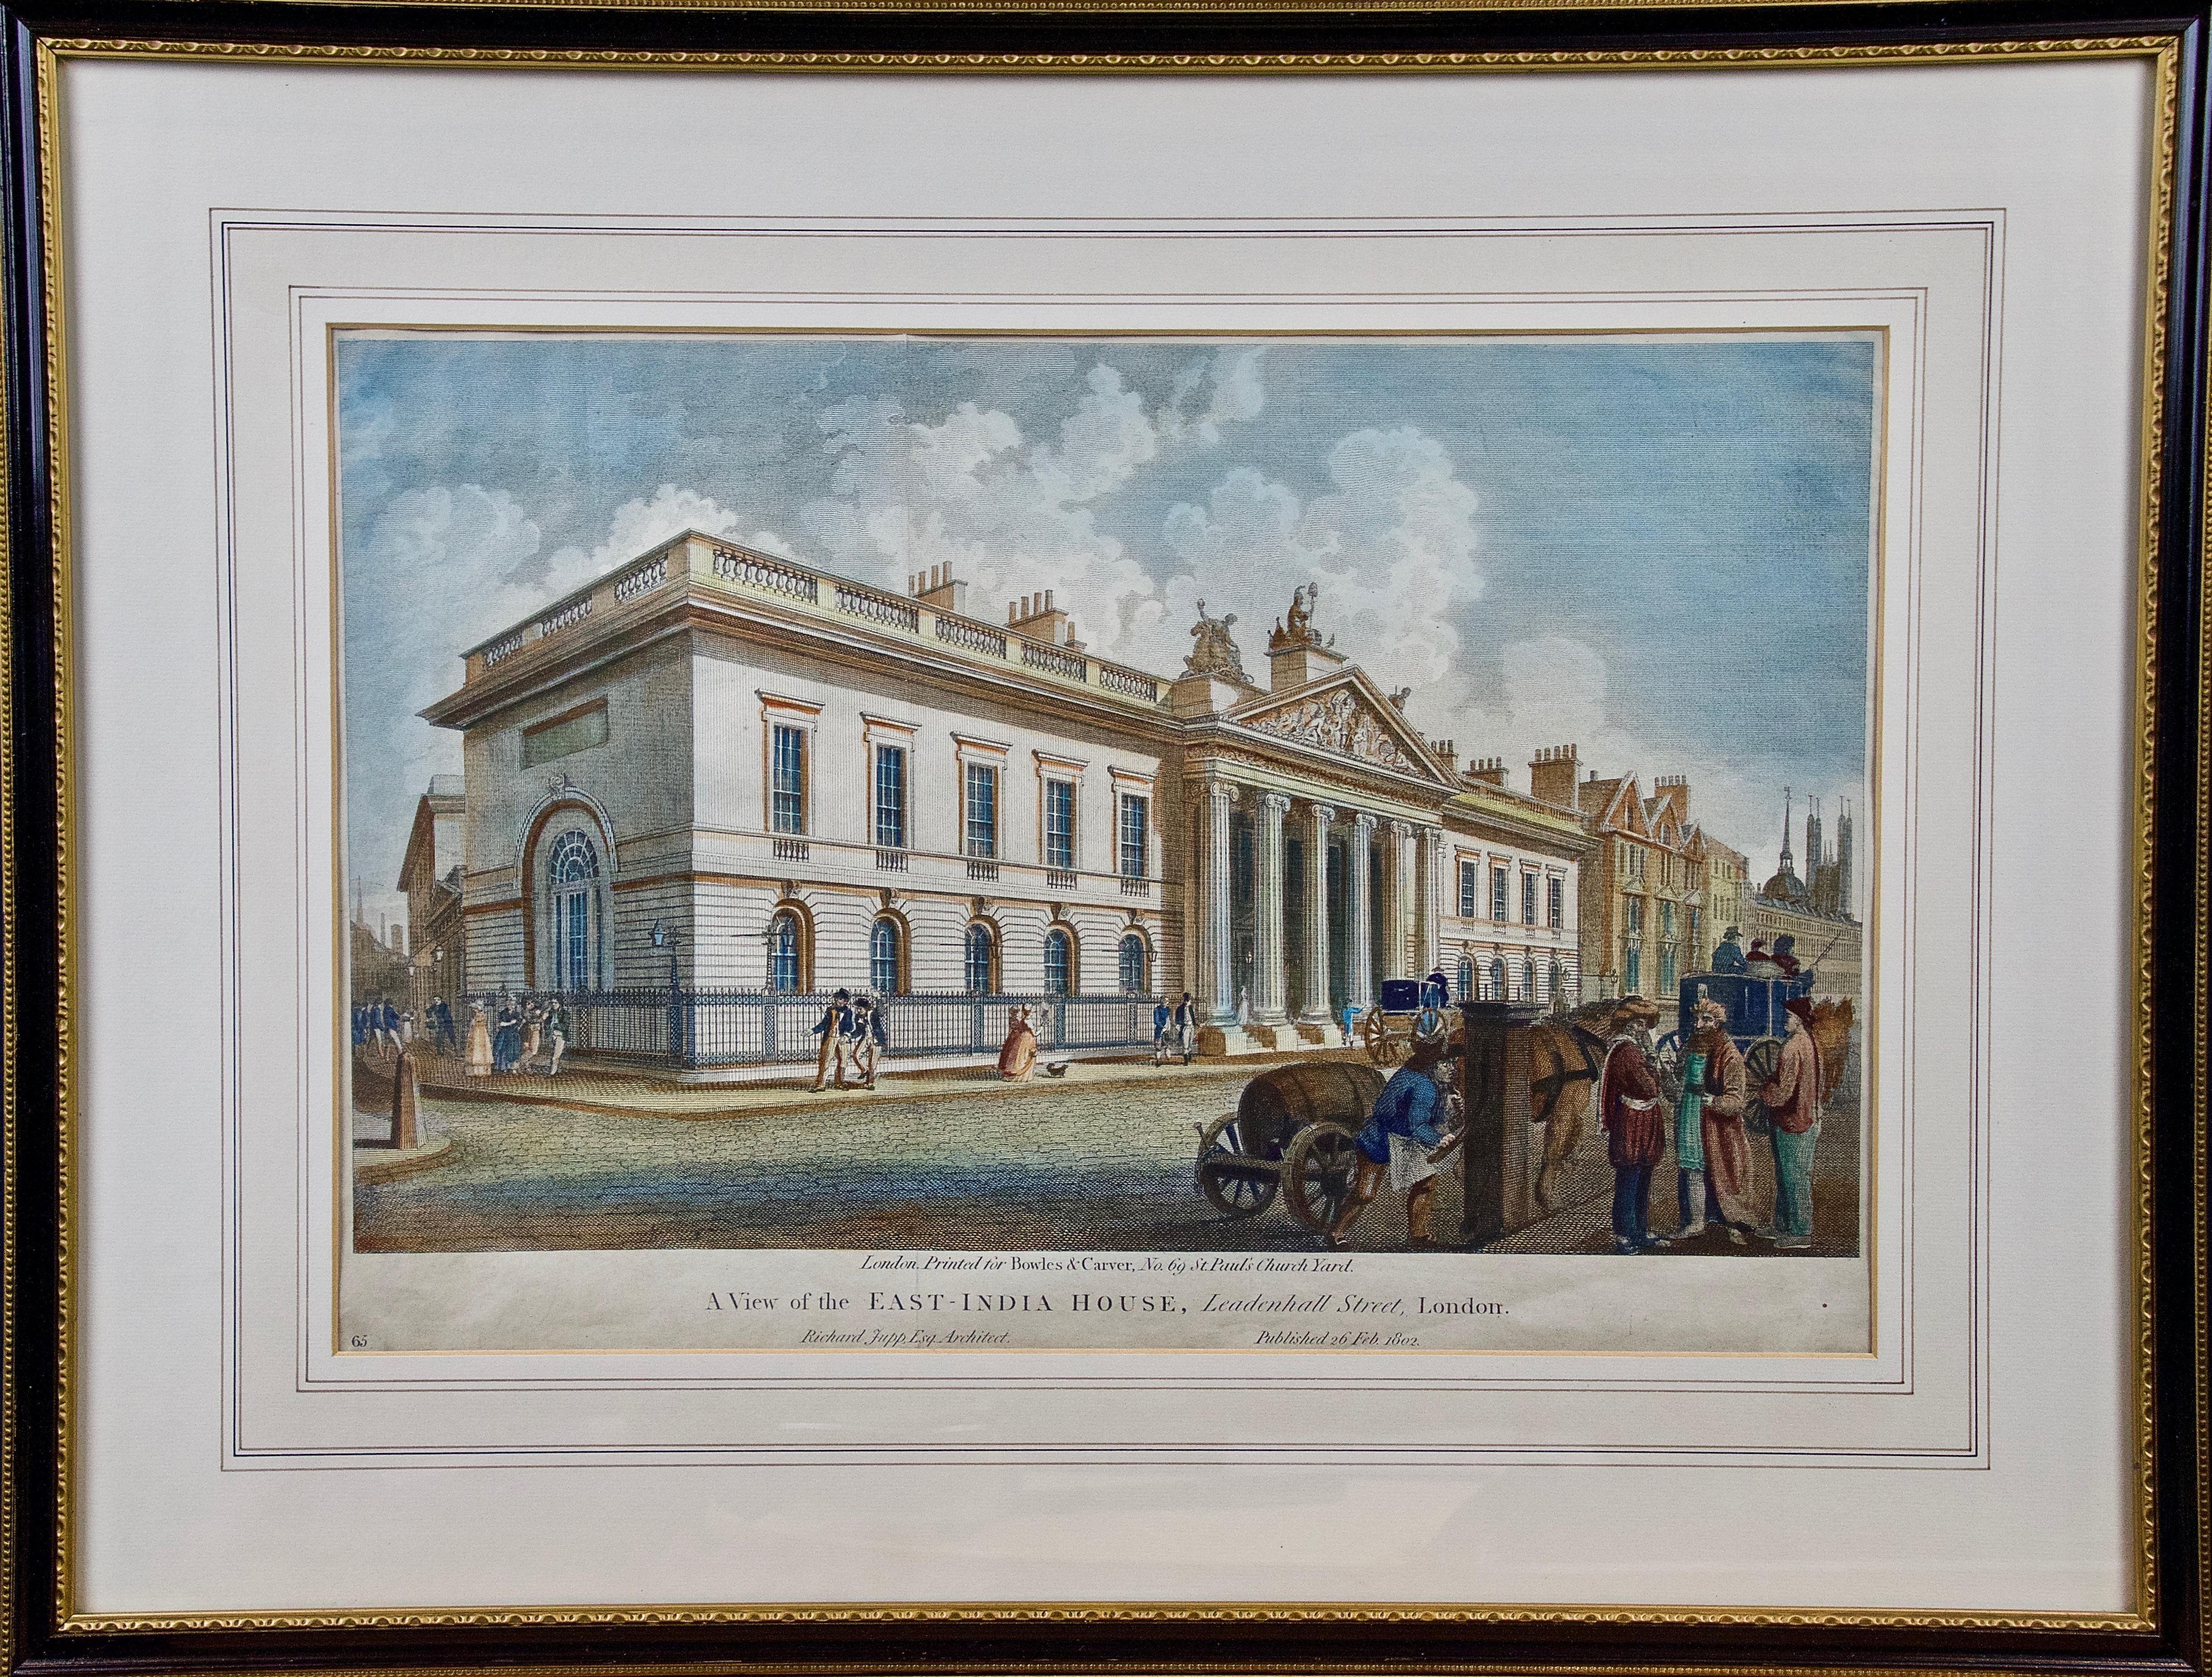 Unknown Landscape Print - Hand Colored Engraving: "View of East India House, Leadenhall Street", London